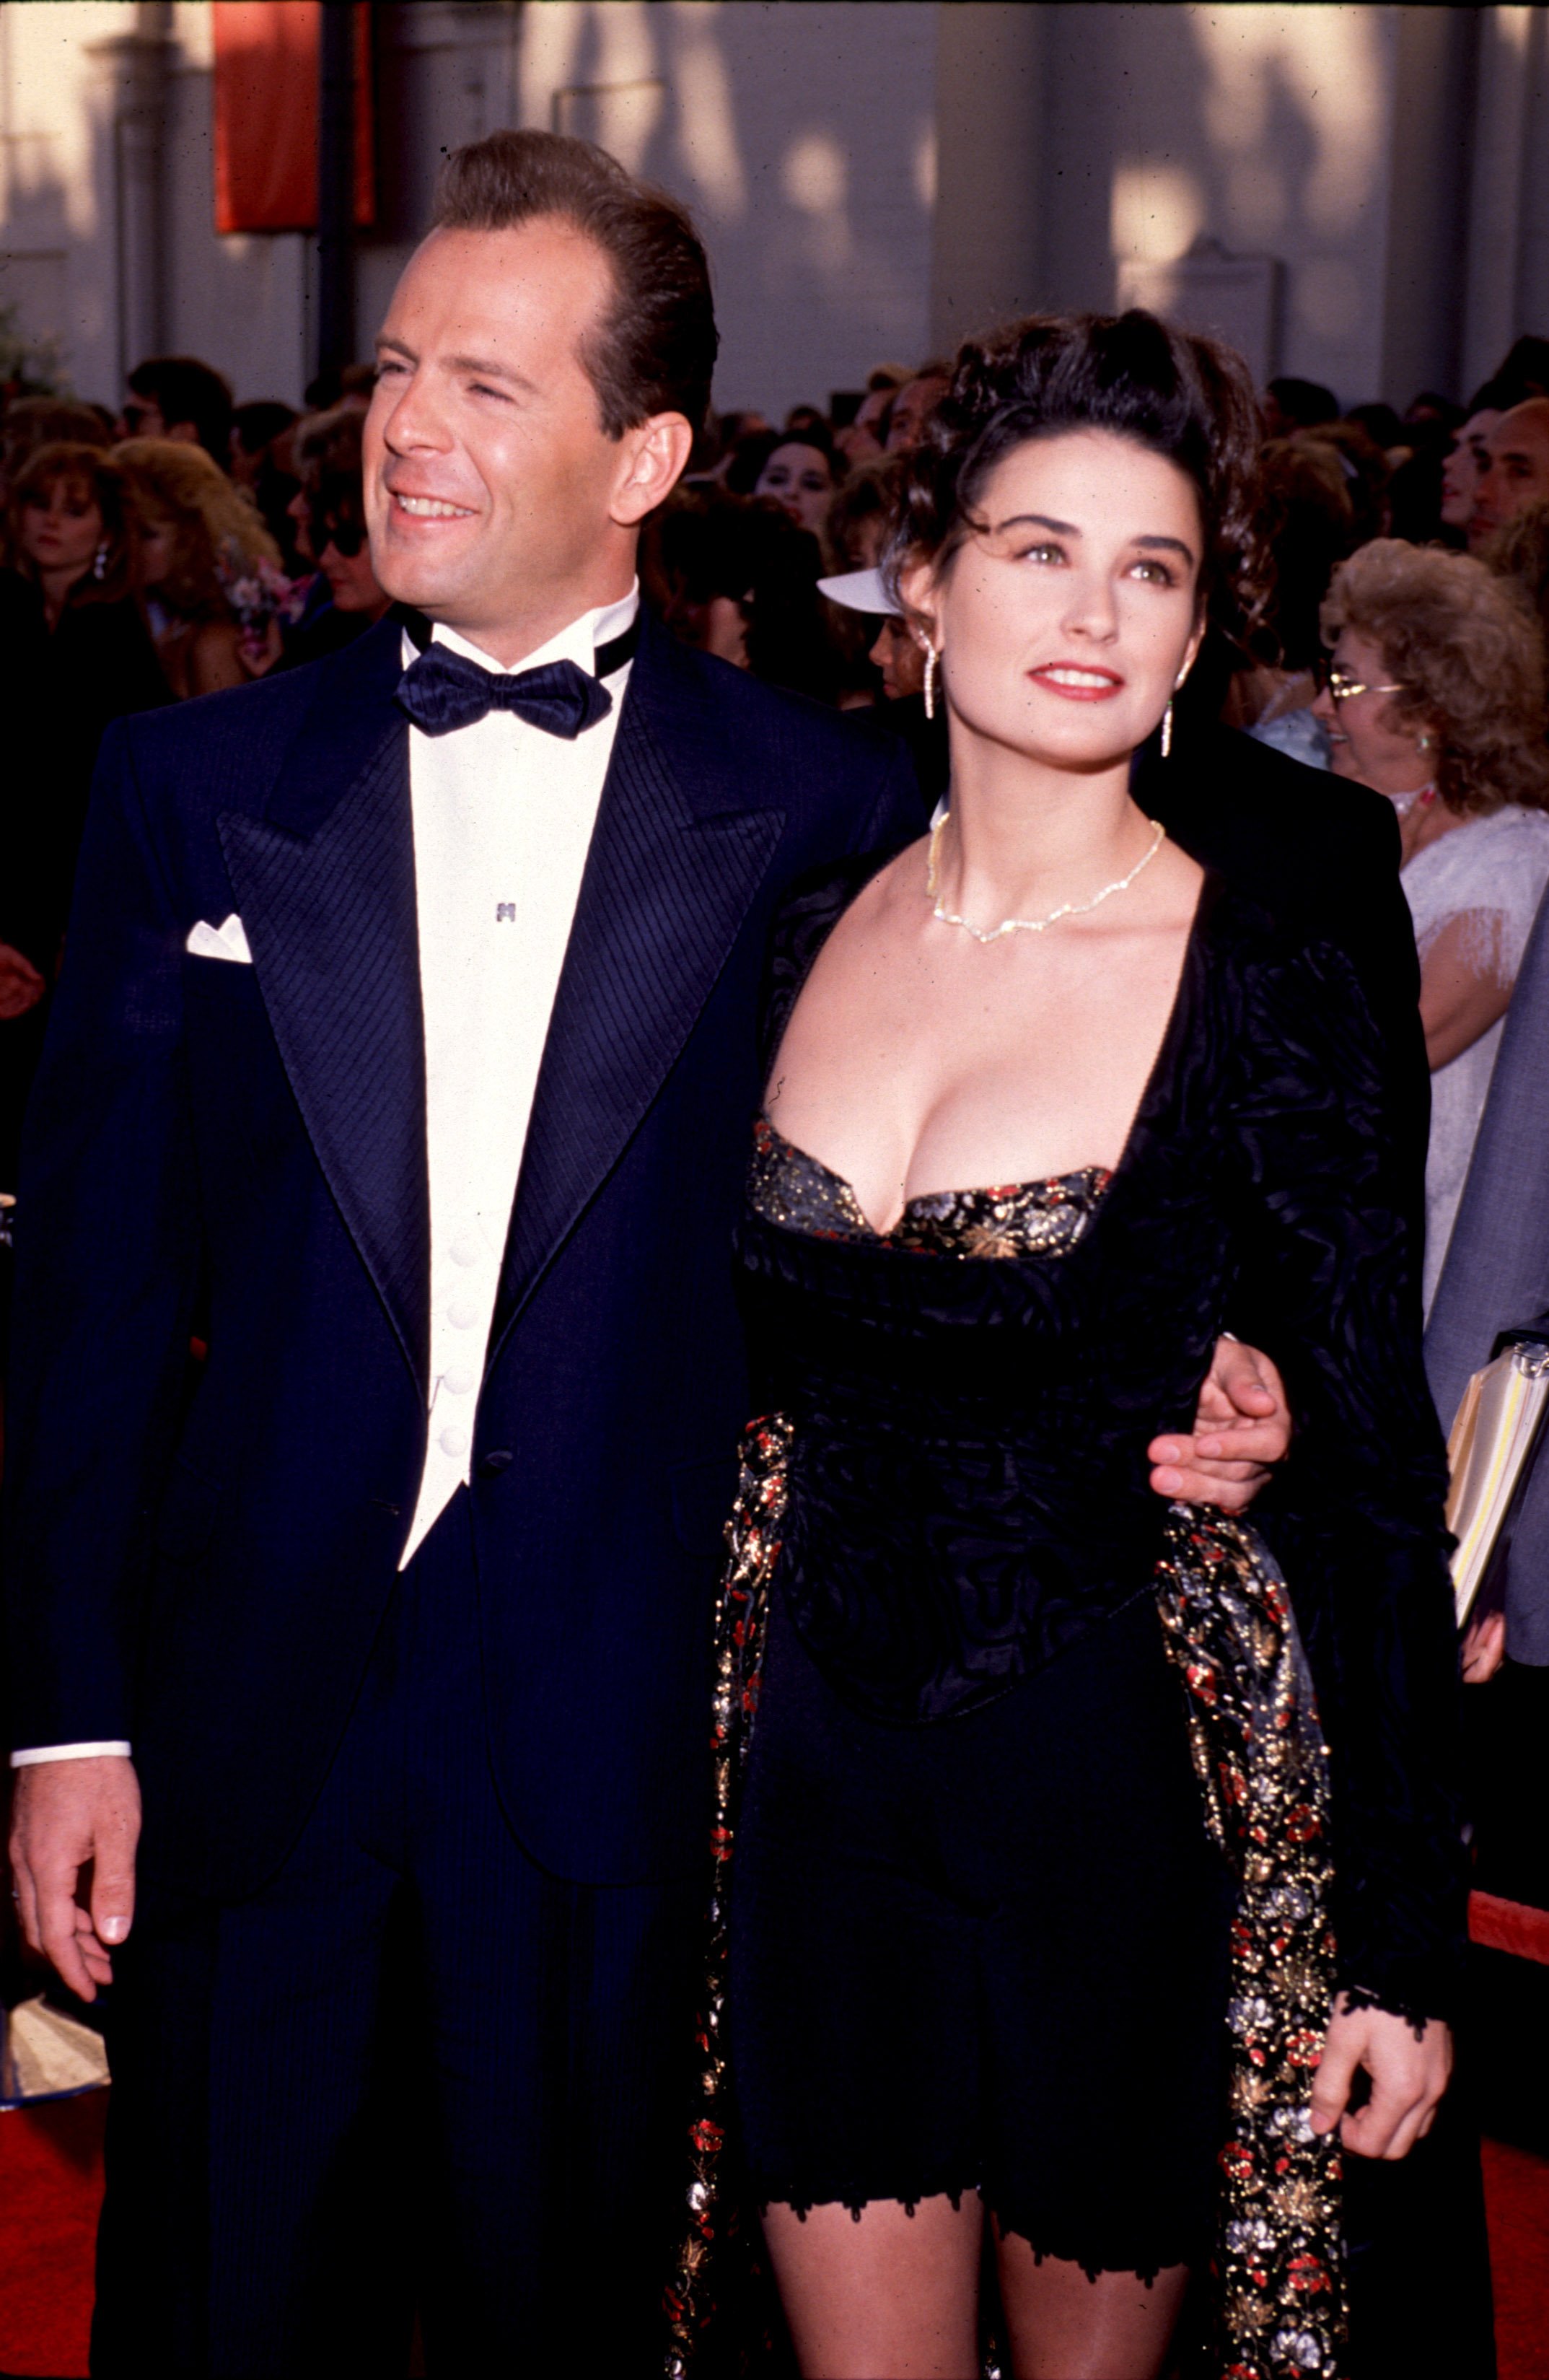 Actor Bruce Willis and his actress wife Demi Moore attend the Emmy Awards on September 15, 1988. ┃Source: Getty Images